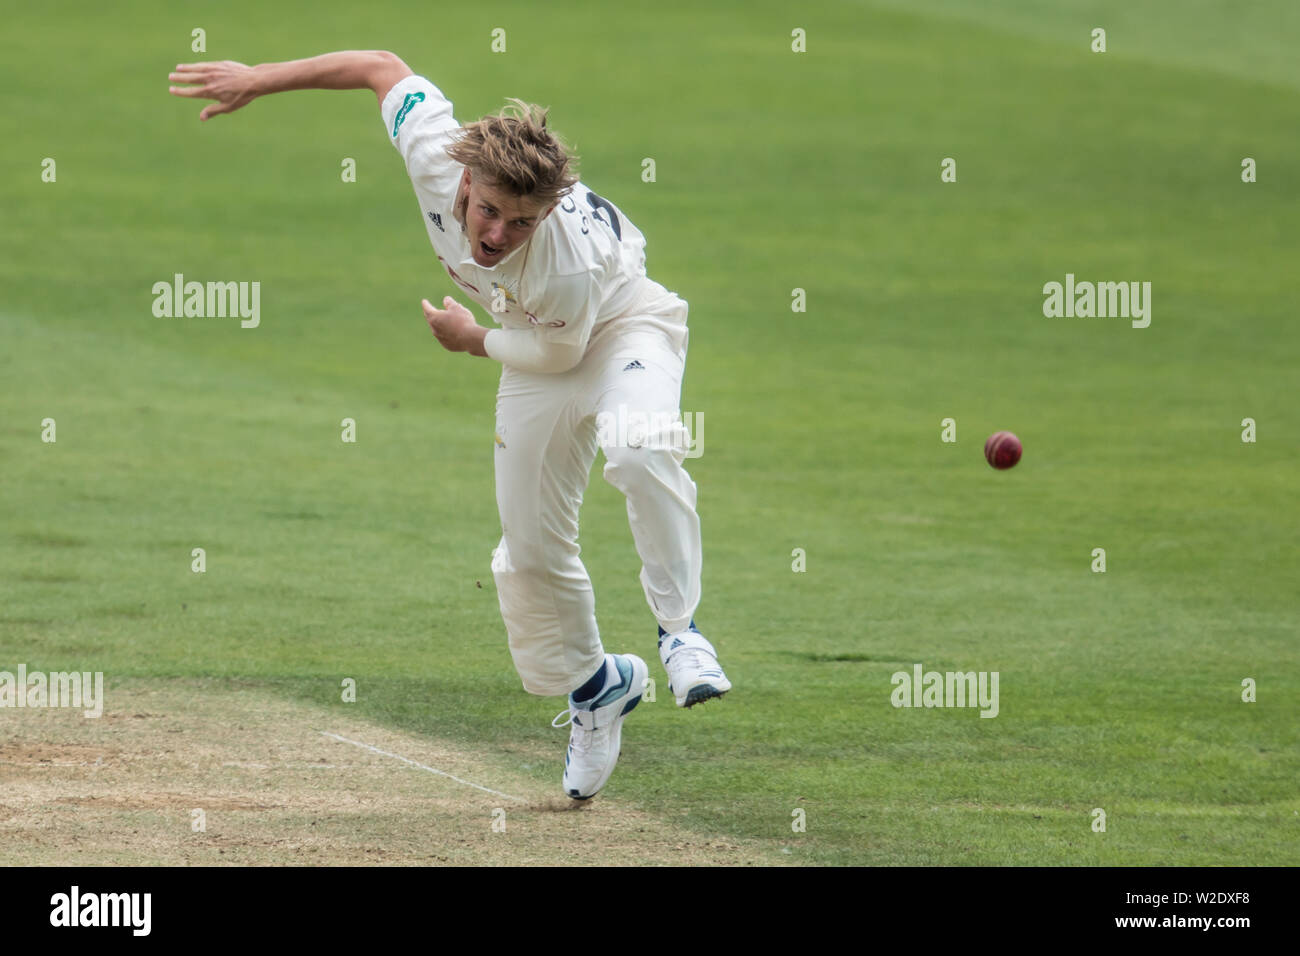 London, UK. 8th July, 2019. Sam Curran bowling for Surrey against Kent on day two of the Specsavers County Championship game at the Oval. Credit: David Rowe/Alamy Live News Stock Photo